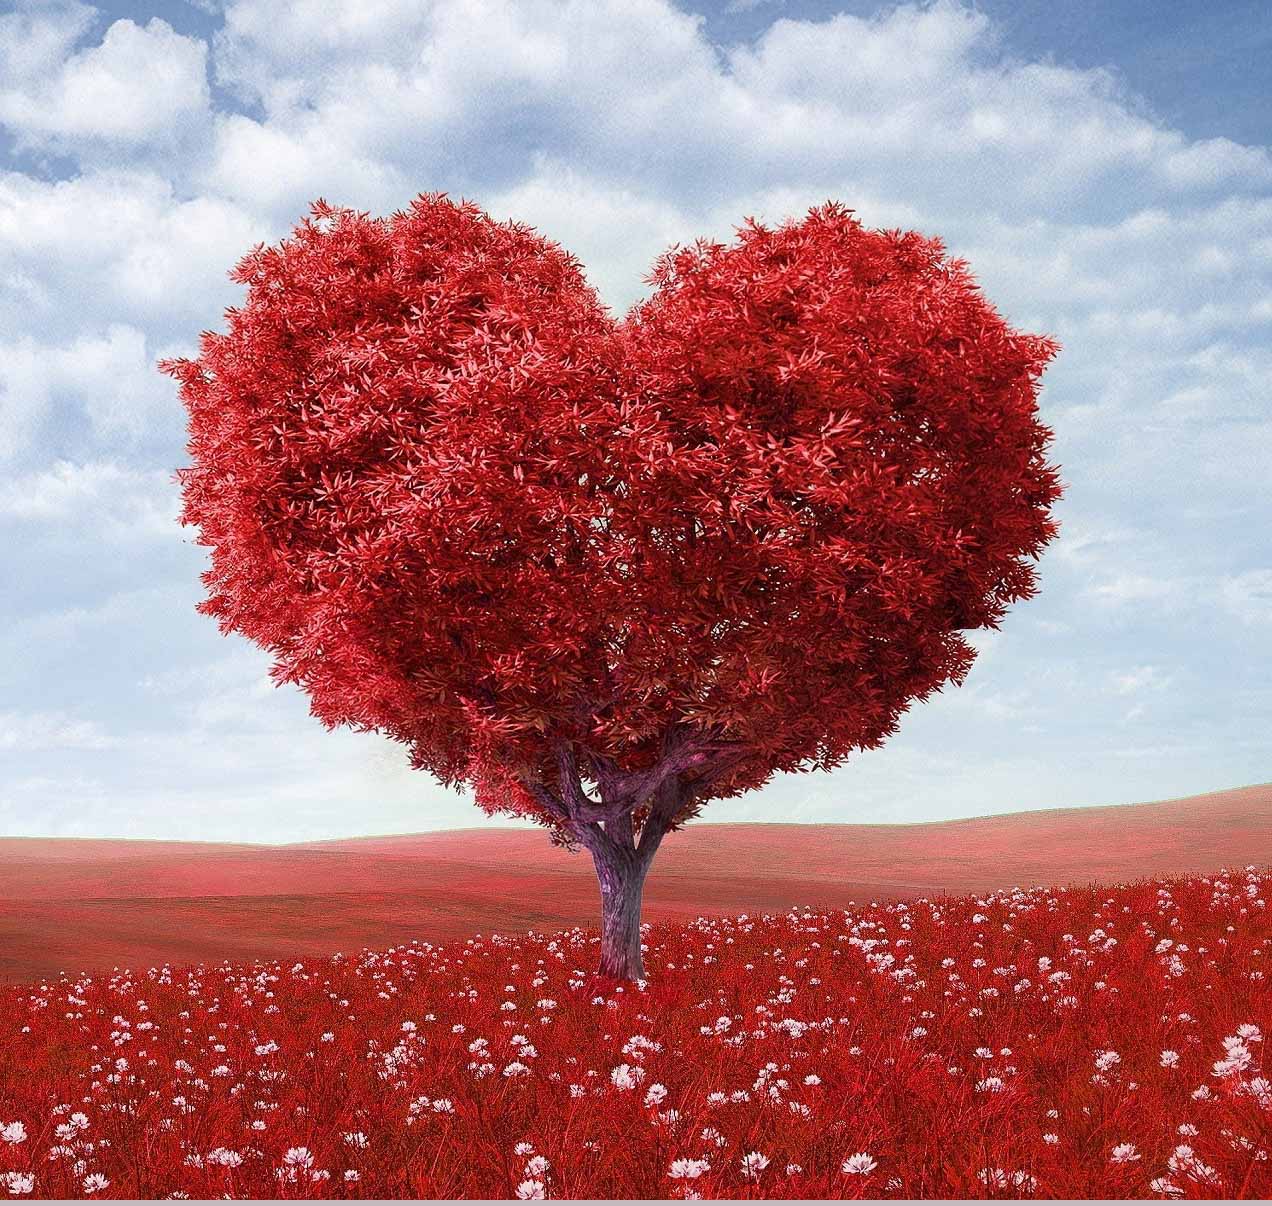 Red heart shaped tree in red field 1272 x 1206